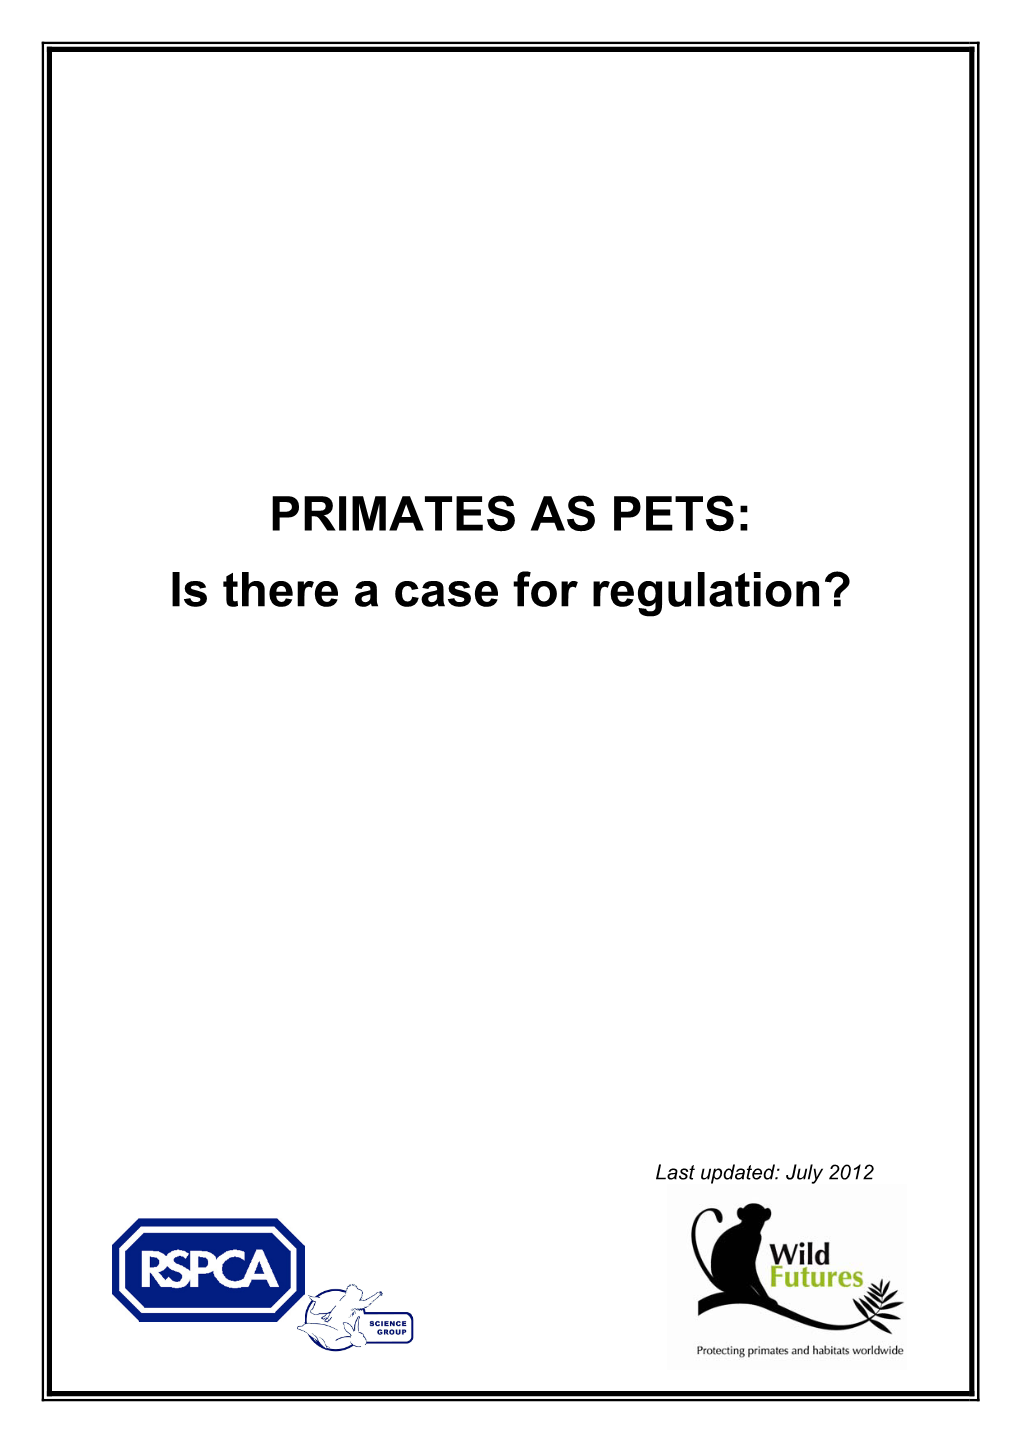 Primates As Pets: Is There a Case for Regulation